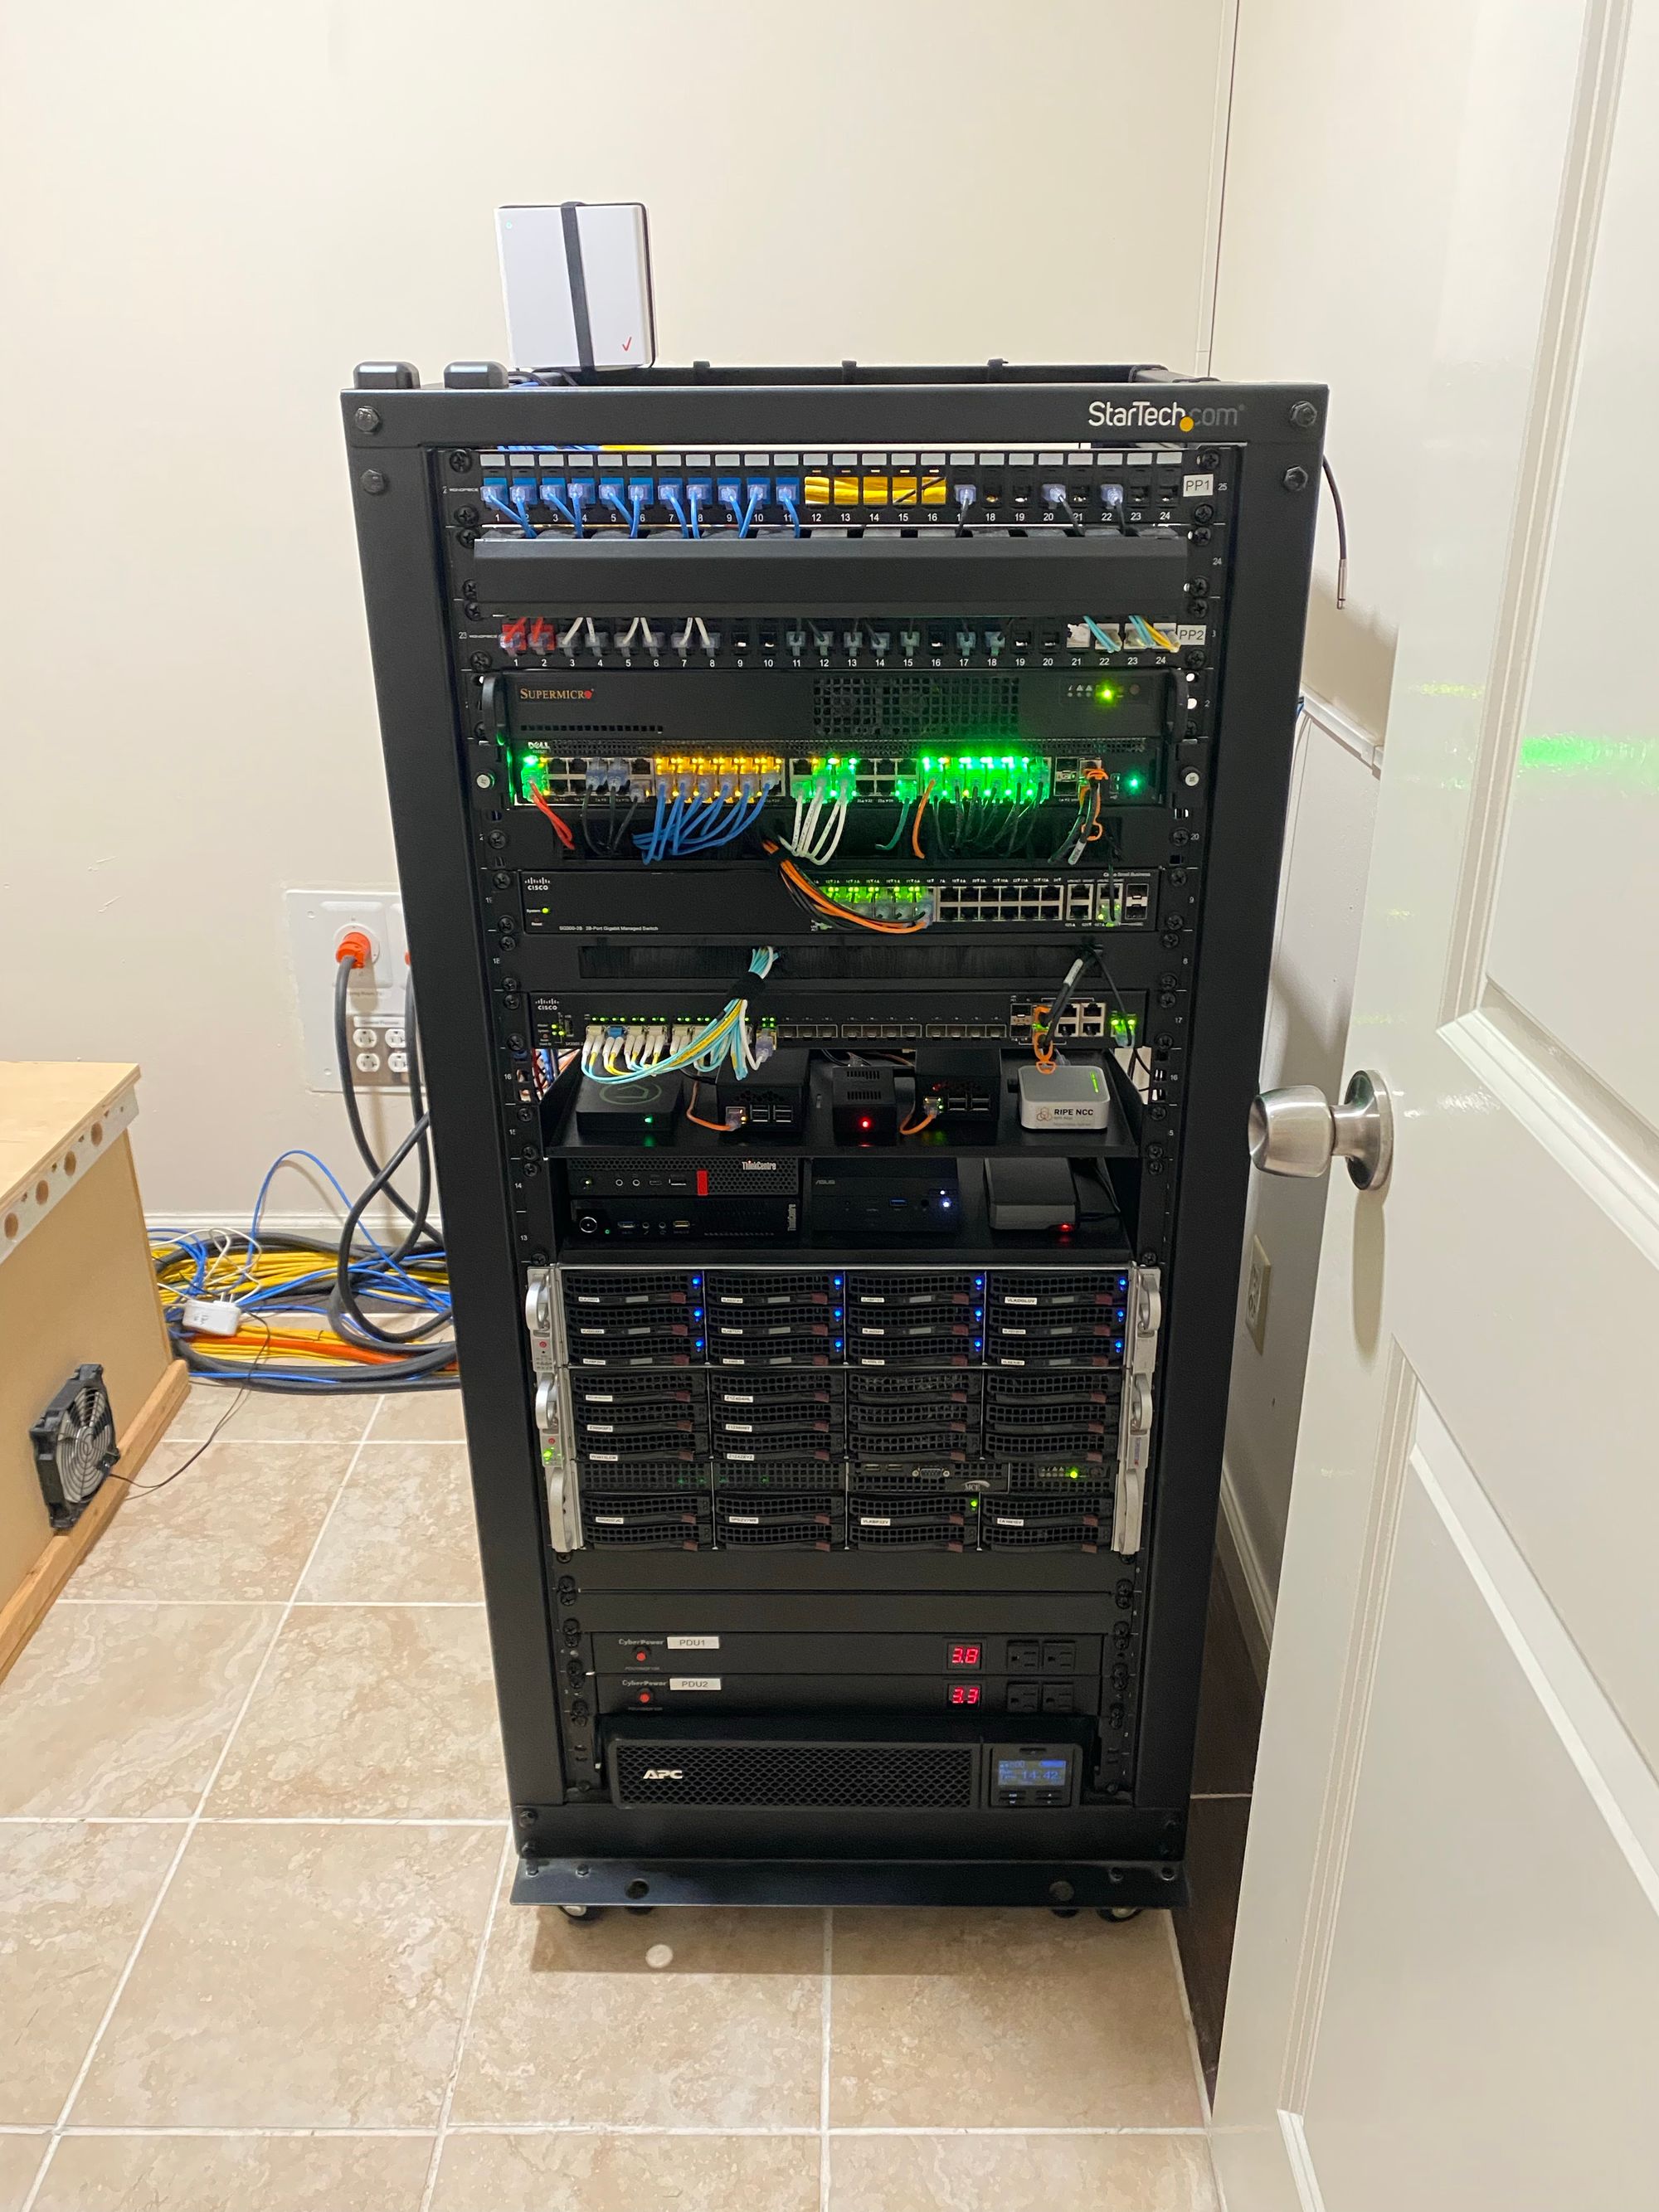 I Made The World's Smallest Server Rack - With UPS and SSD Storage